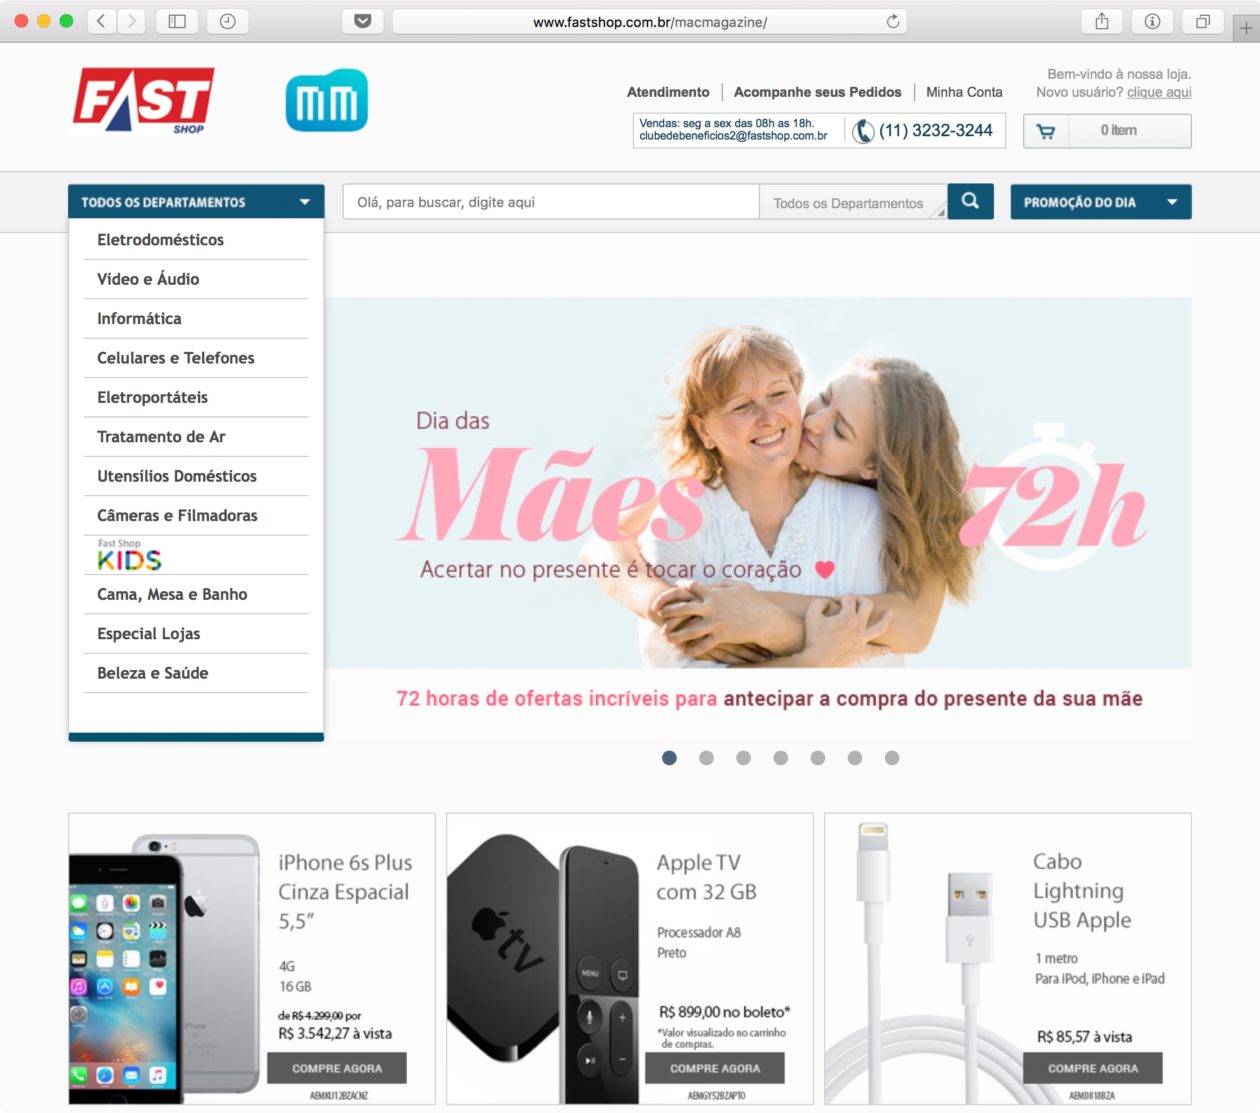 MacMagazine starts partnership with Fast Shop bringing special offers on Apple TV and iPhone 6s Plus!